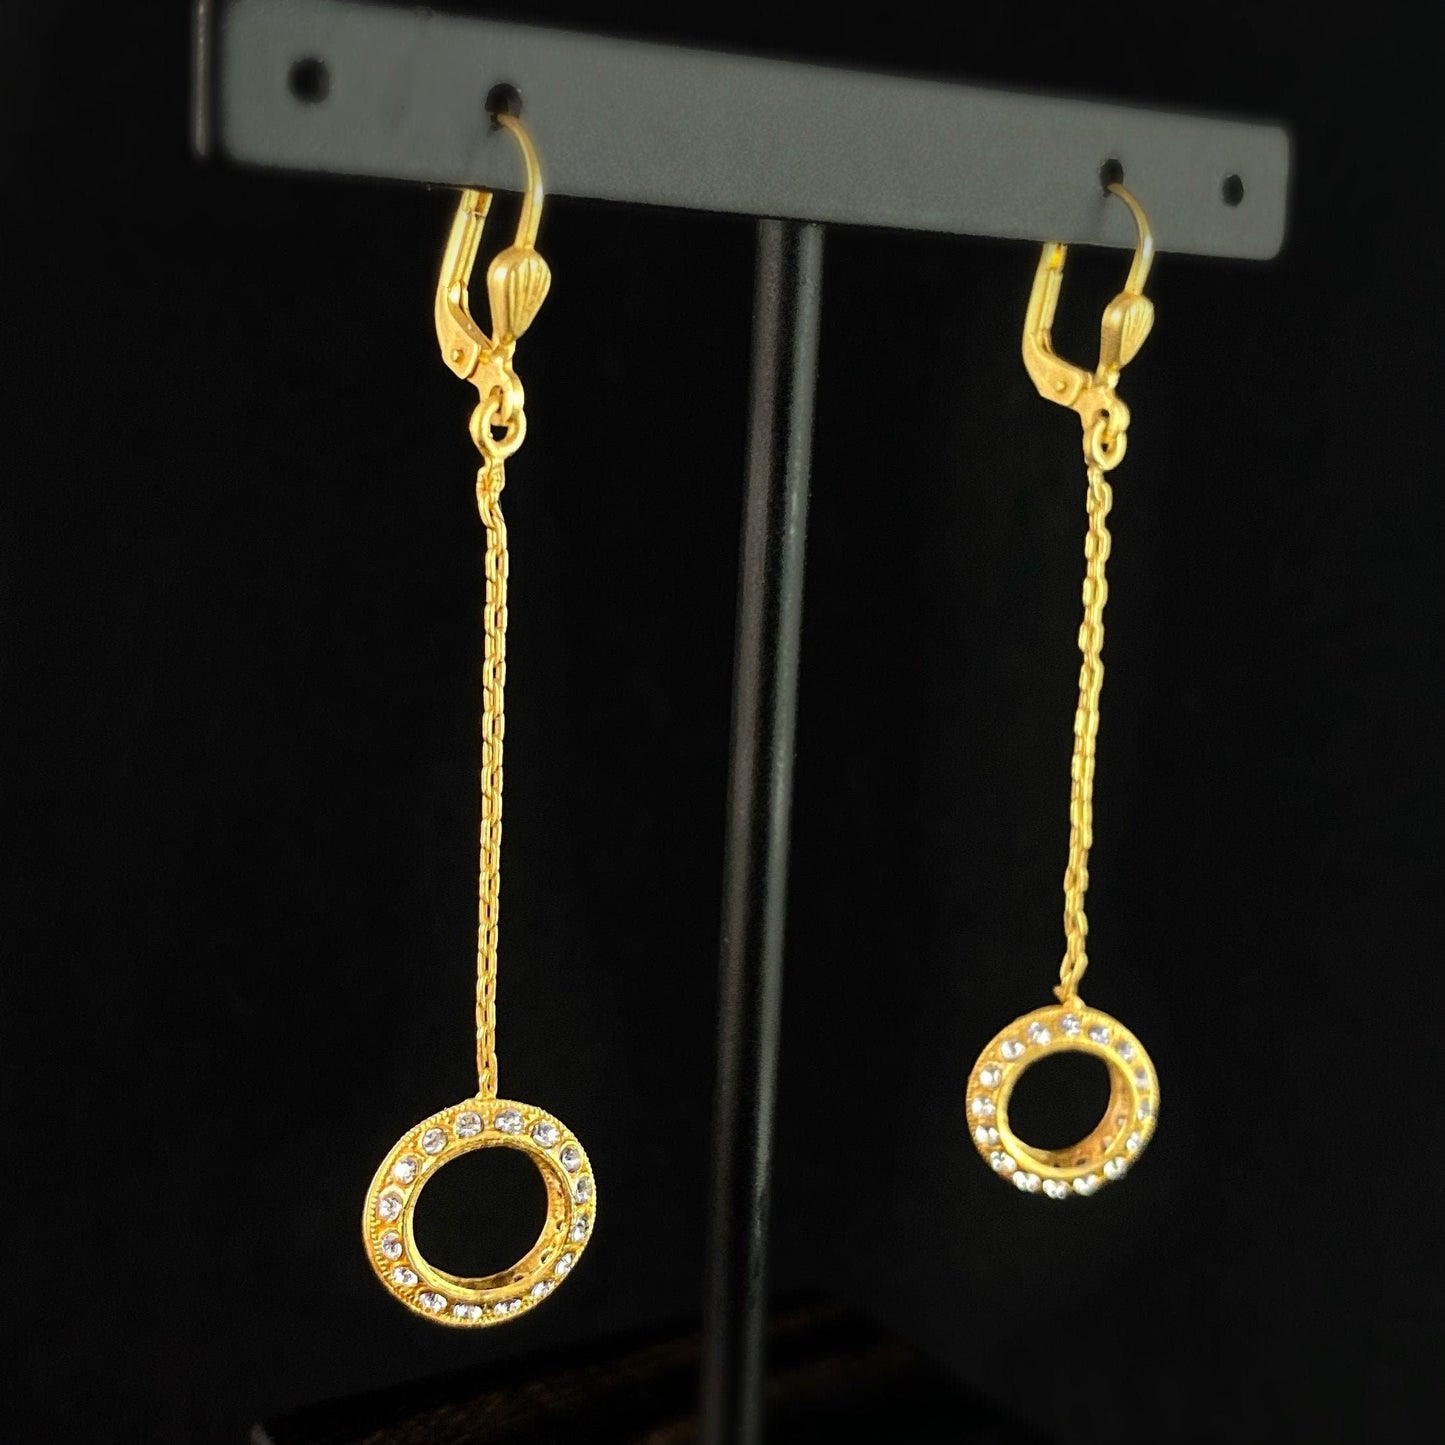 Round Gold Drop Earrings with Clear Swarovski Crystals - La Vie Parisienne by Catherine Popesco